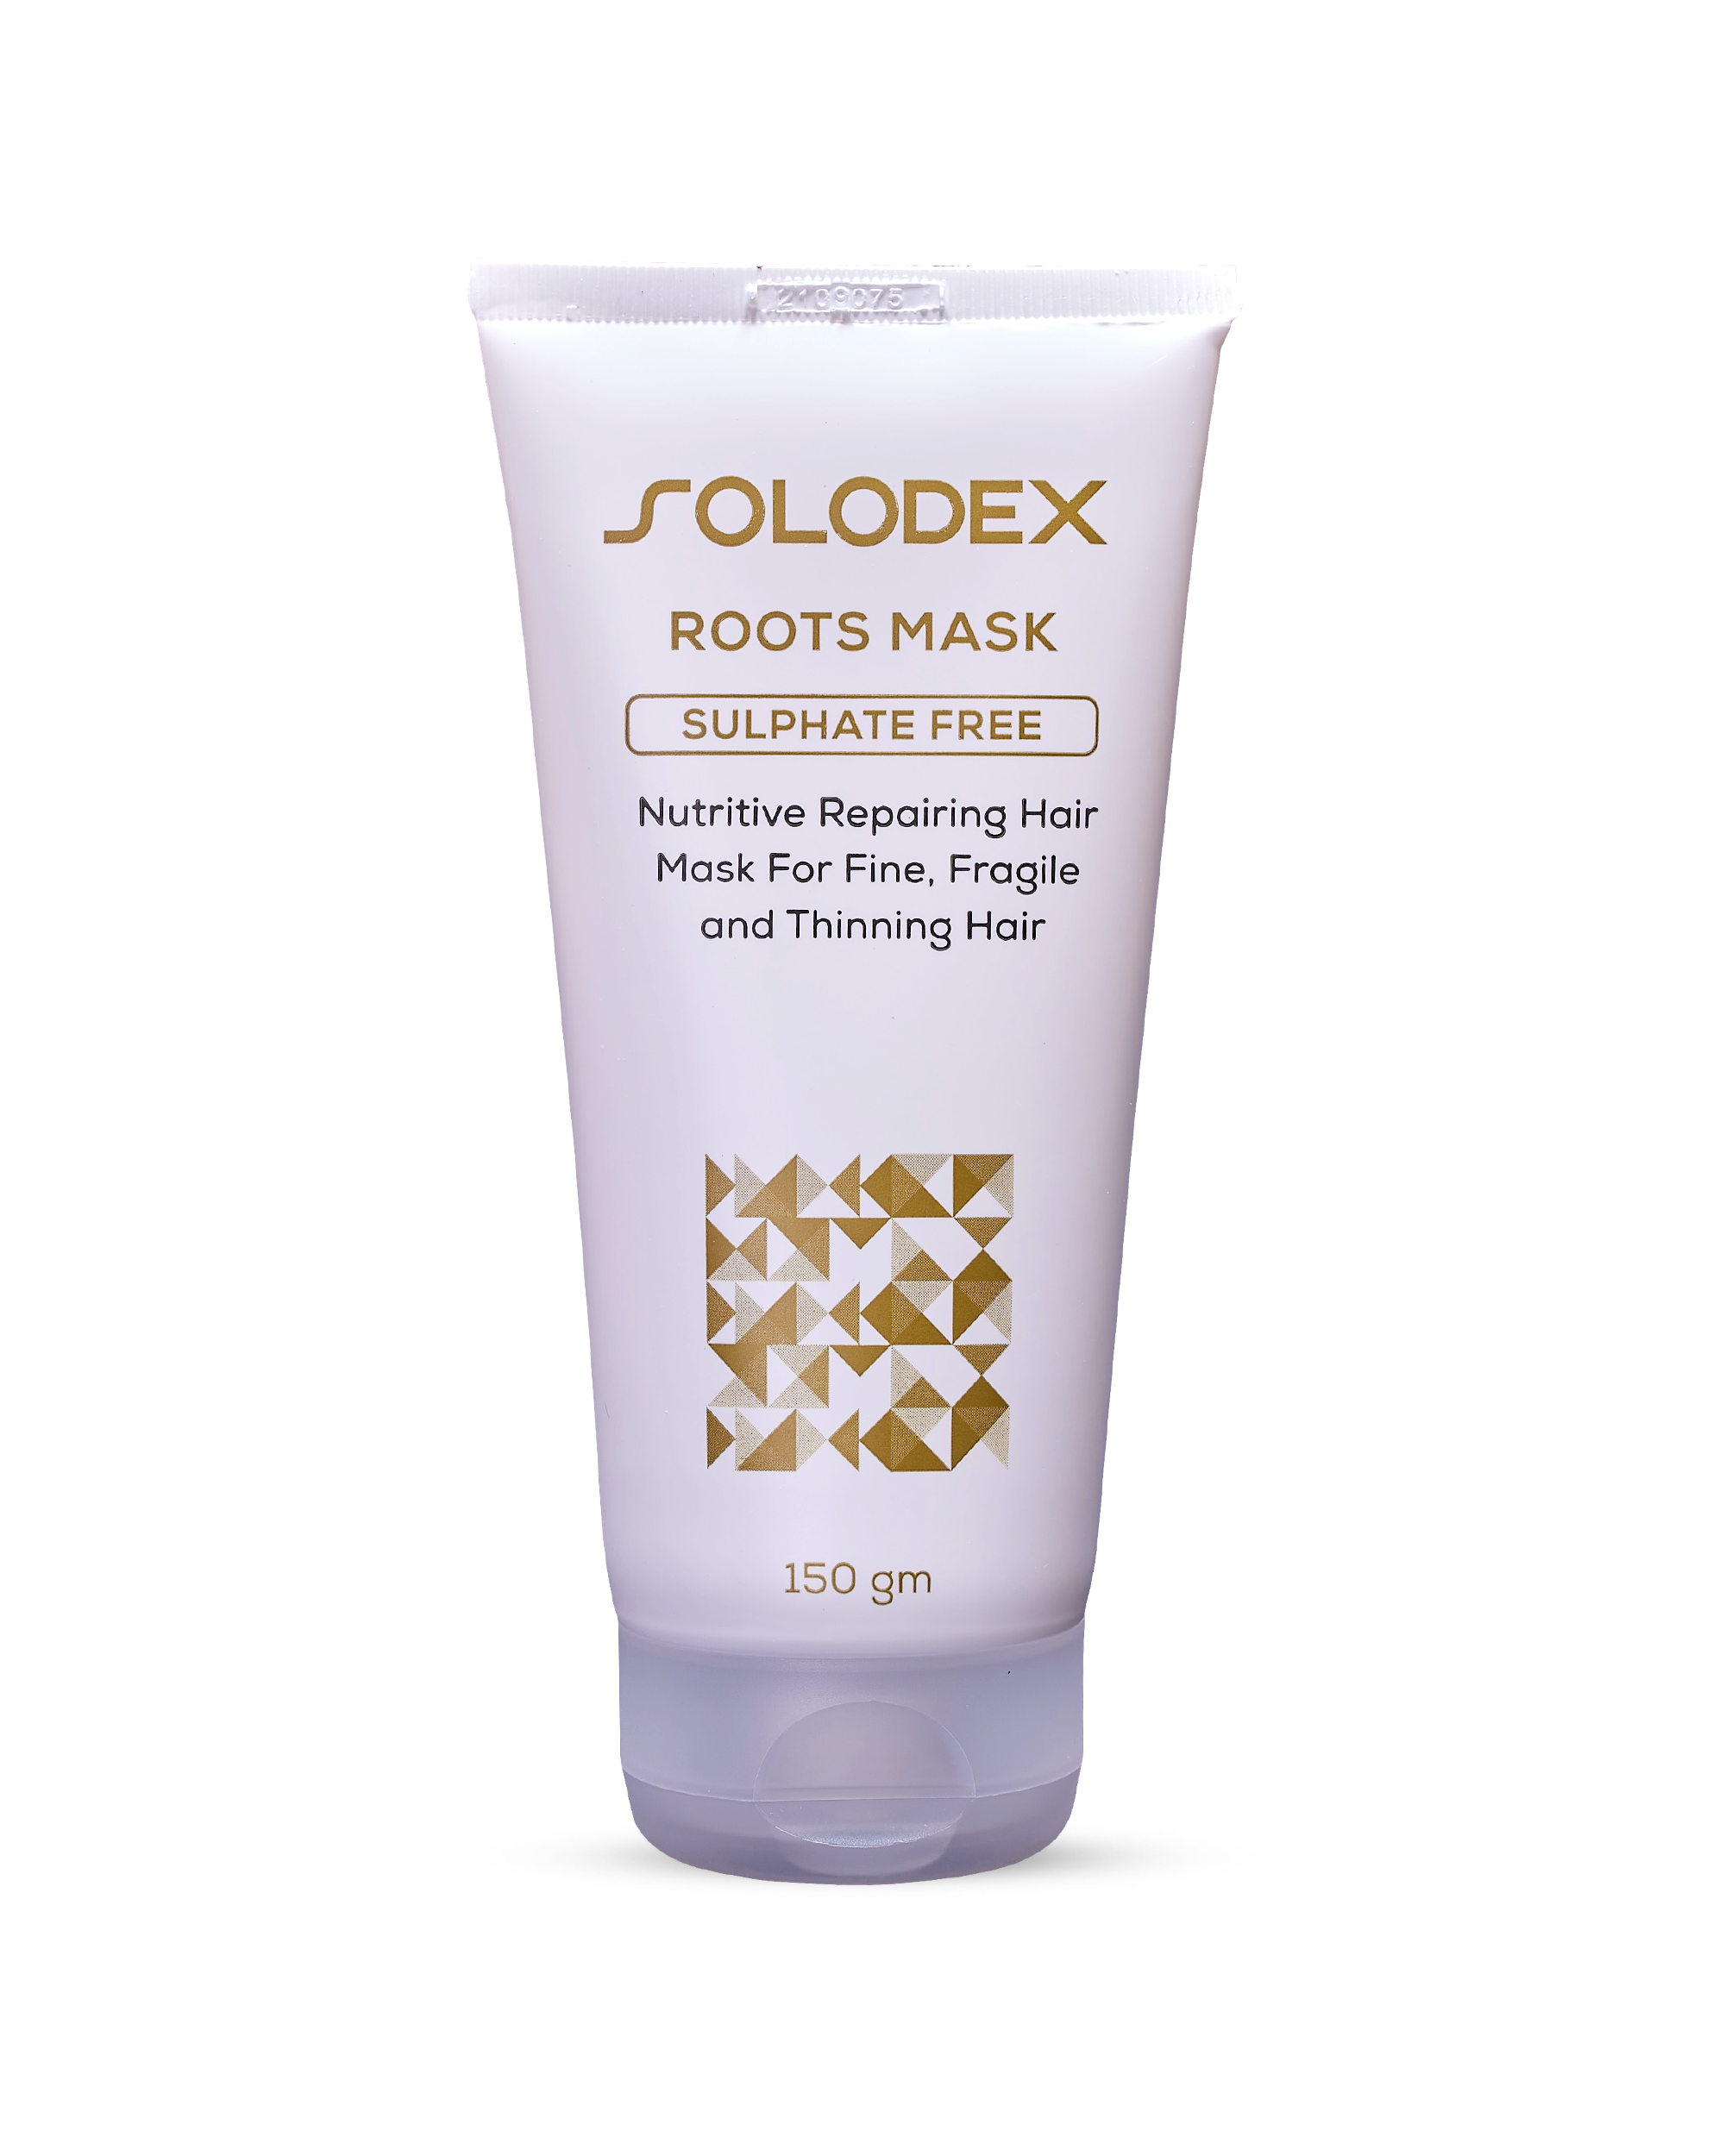 Solodex Roots Mask 150 gm